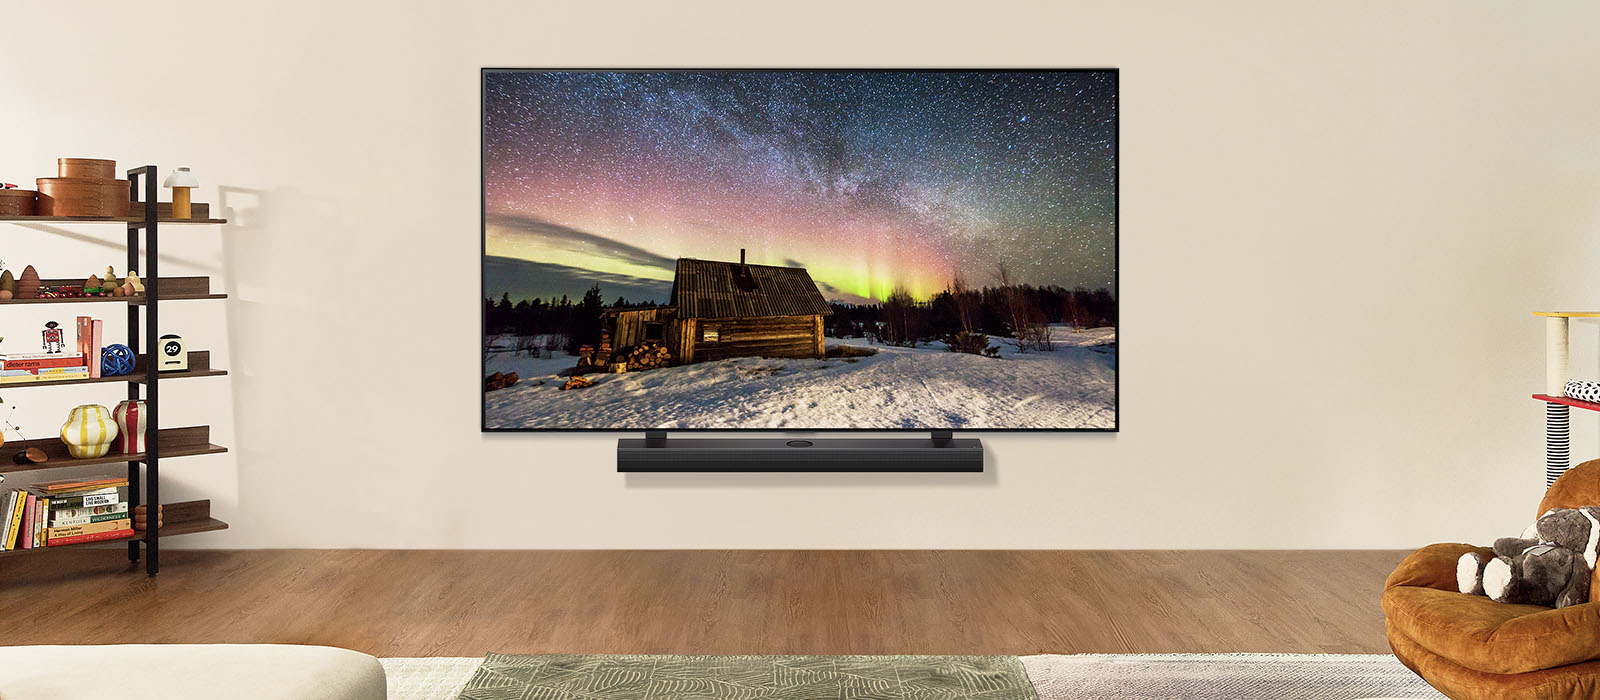 LG TV and LG Soundbar in a modern living space in daytime. The screen image of the aurora borealis is displayed with the ideal brightness levels.